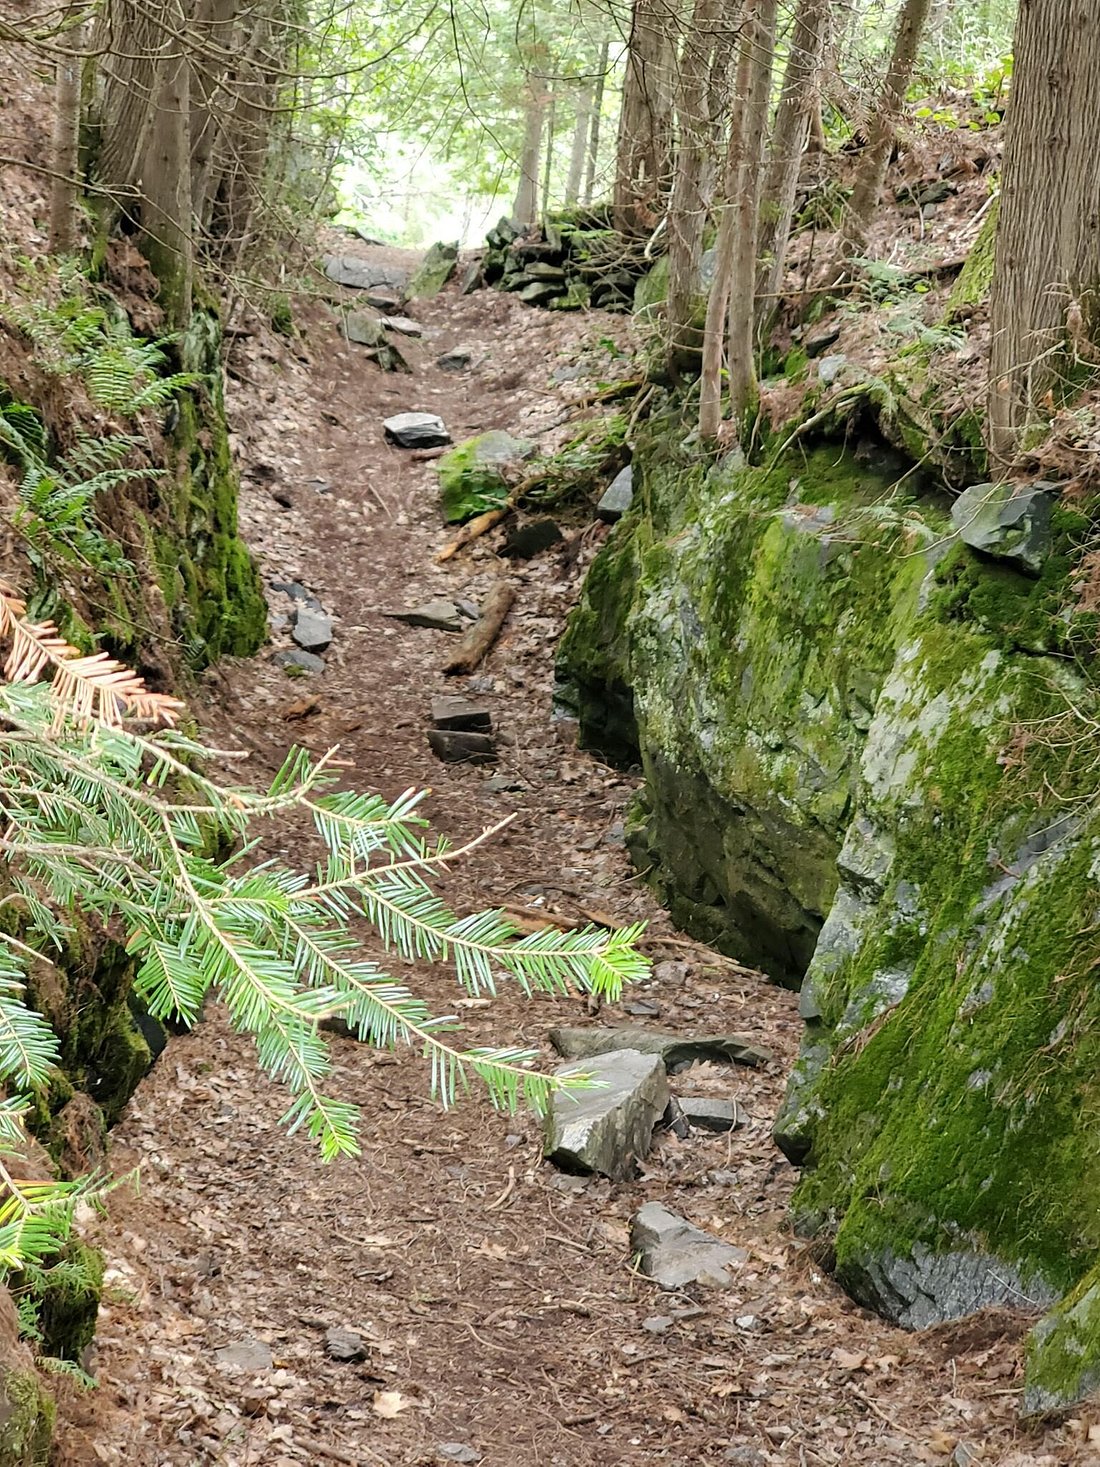 Twin Bridges Trail; a beautiful forest trail lined with mossy rocks in Chutes Provincial Park